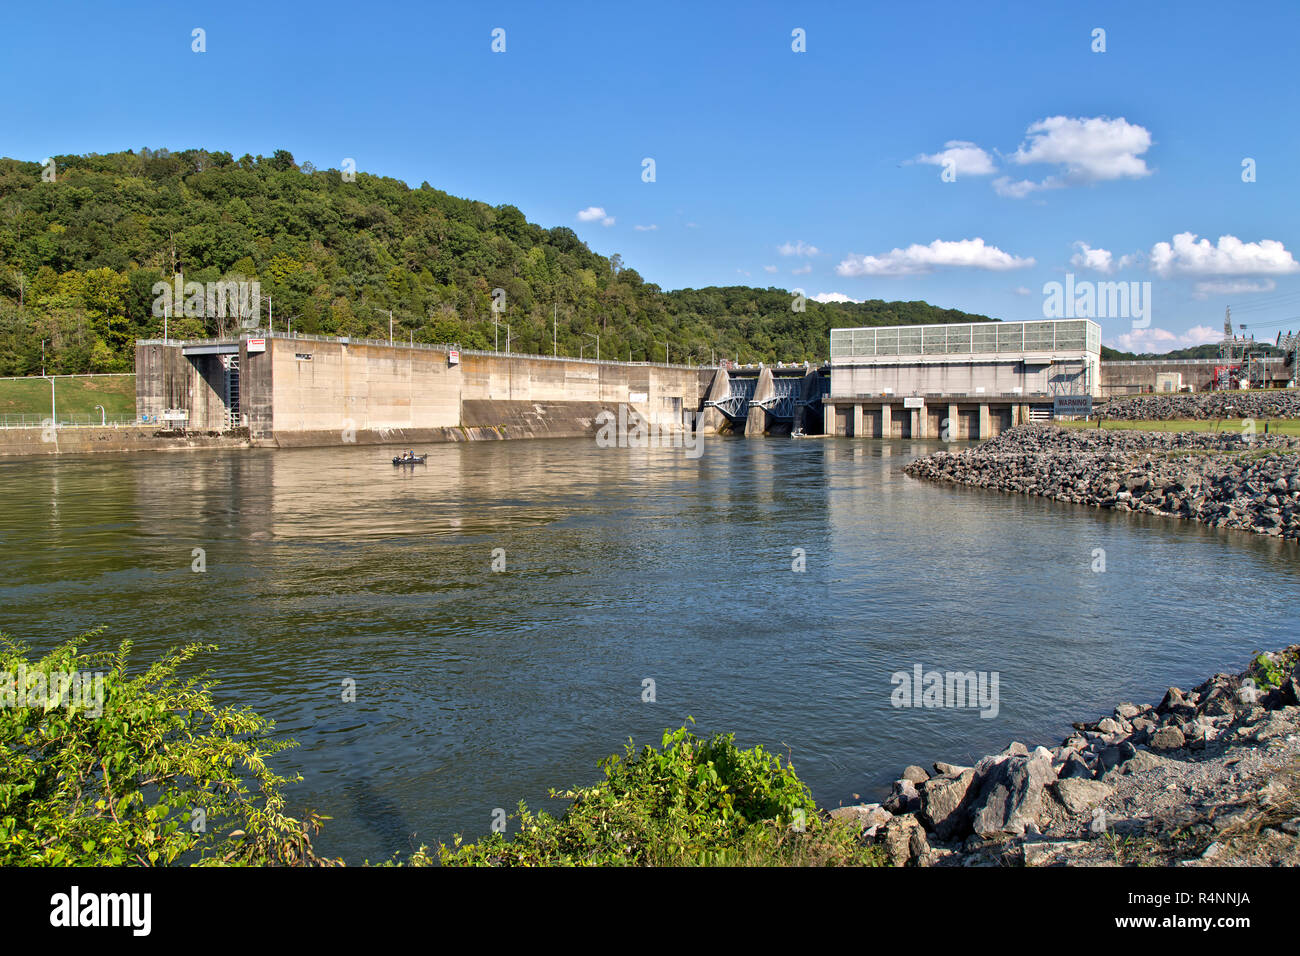 Melton Hill Hydroelectric Dam & Power Station. Melton Hill Recreation Area,  U.S. Army Corps Of Engineers, is a run-of-river reservoir. Stock Photo